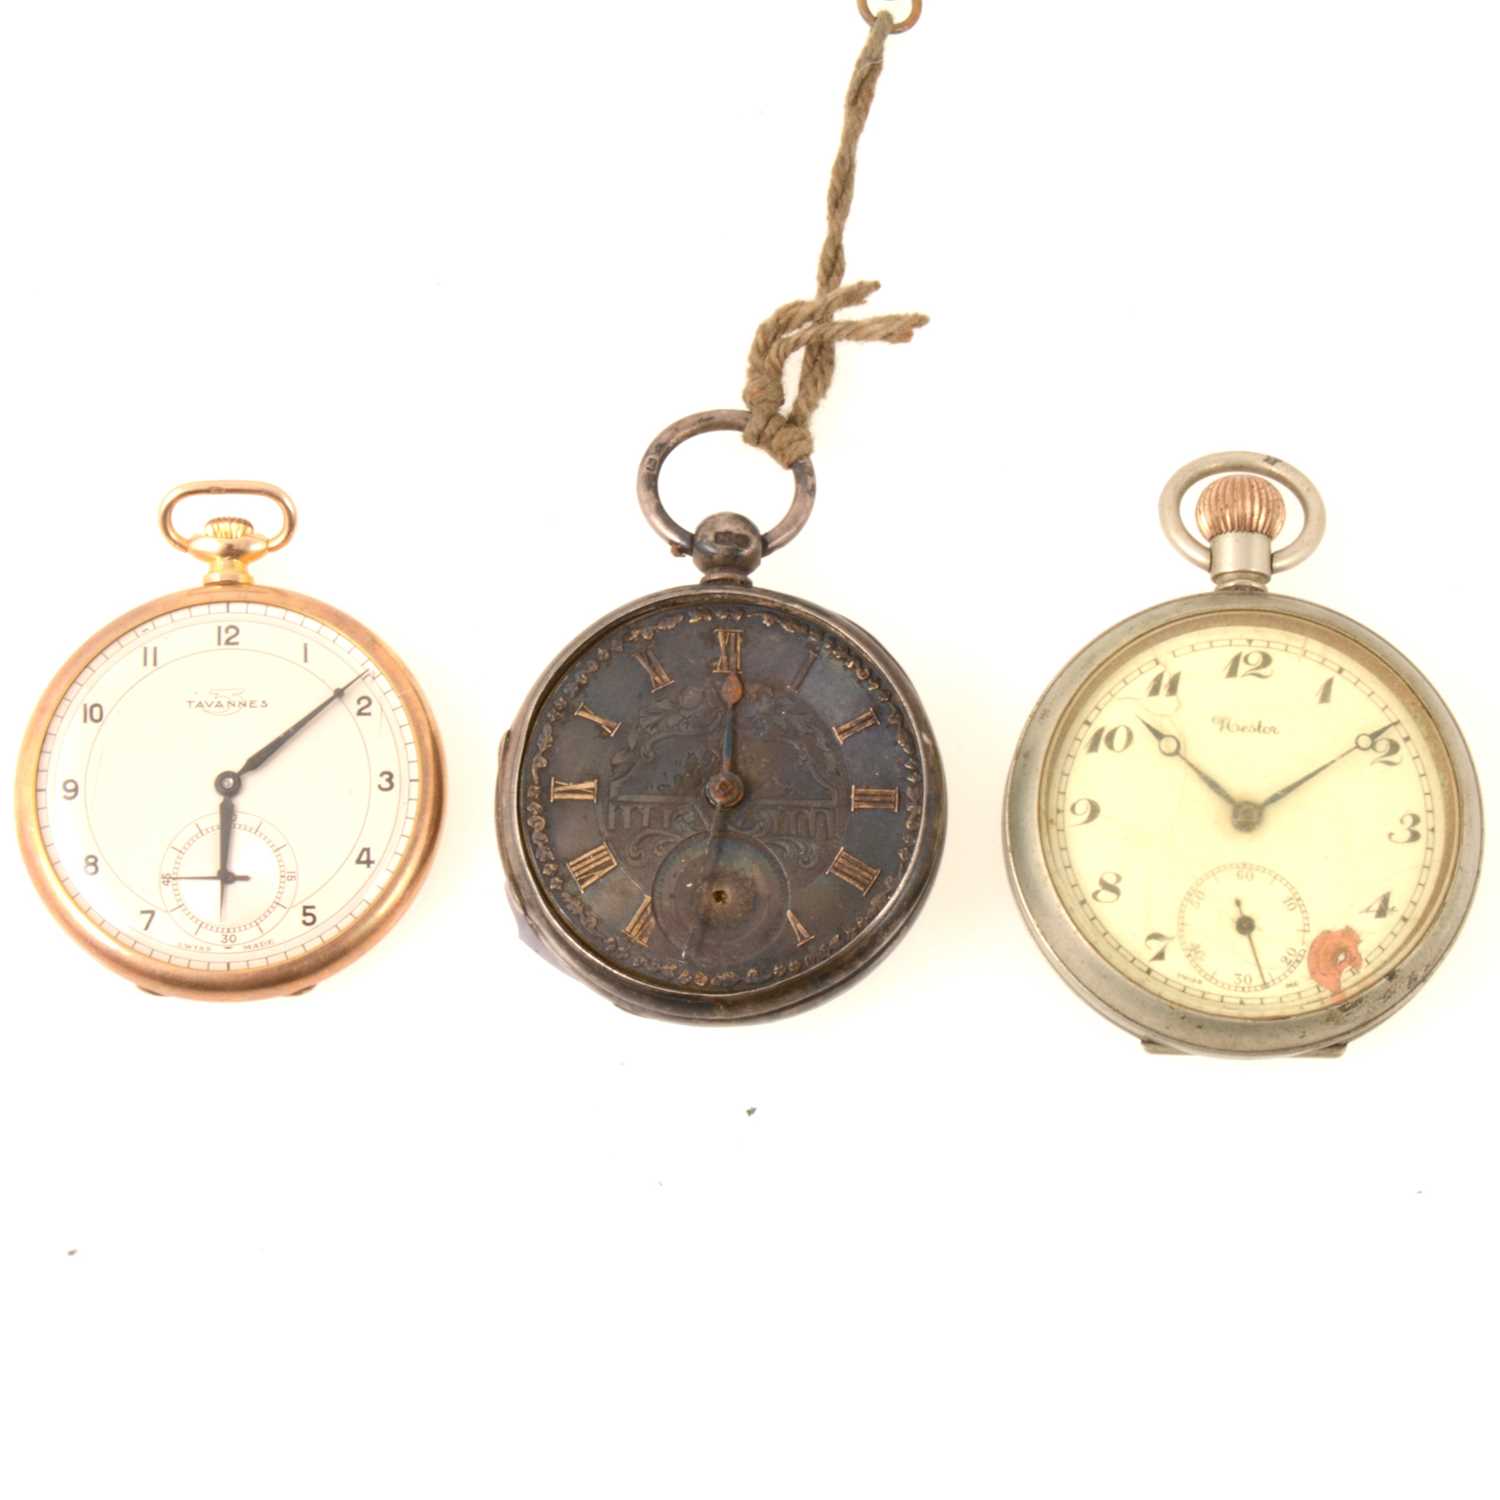 Lot 224 - Three pocket watches gold, silver and base metal.